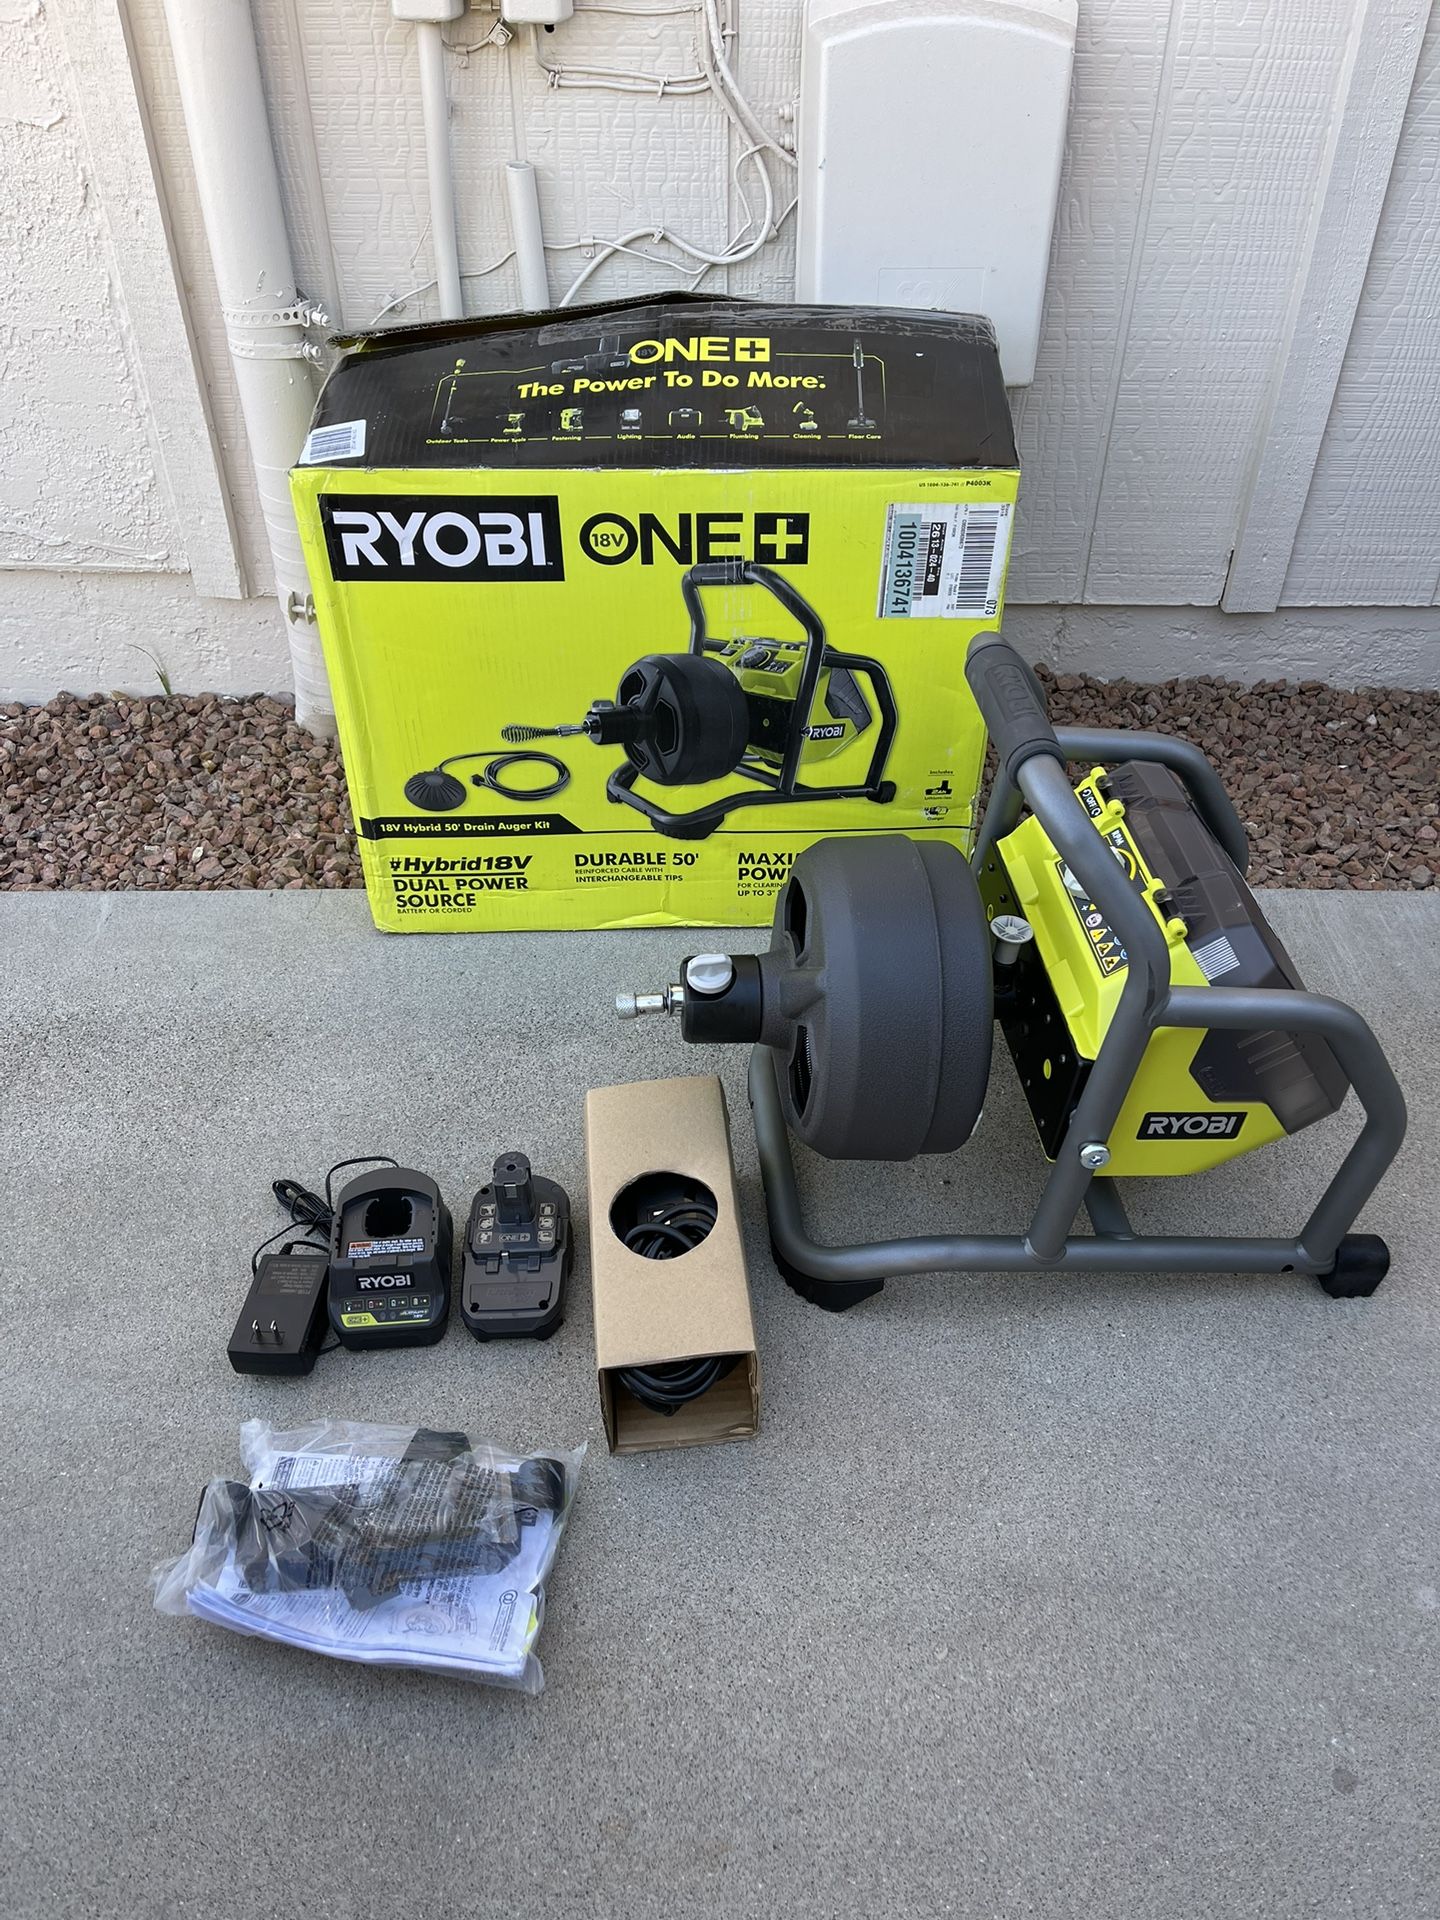 RYOBI ONE+ 18V Hybrid Drain Auger Kit with 50 ft. Cable, 2.0 Ah Battery, 18V Charger 